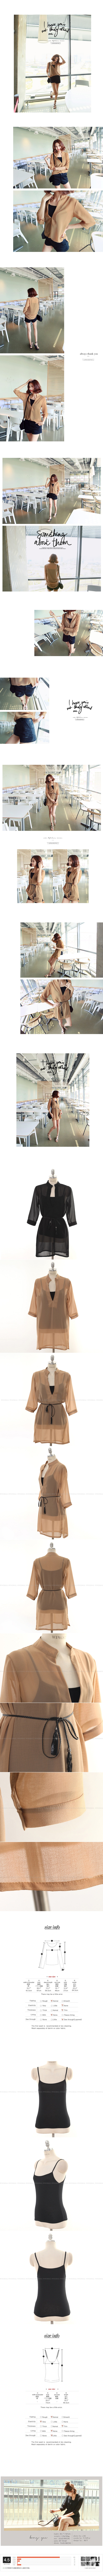 [New Arrival] See-through Chiffon Blouse with Tank Top and Belt 3 Piece Set Brown One Size(S-M)